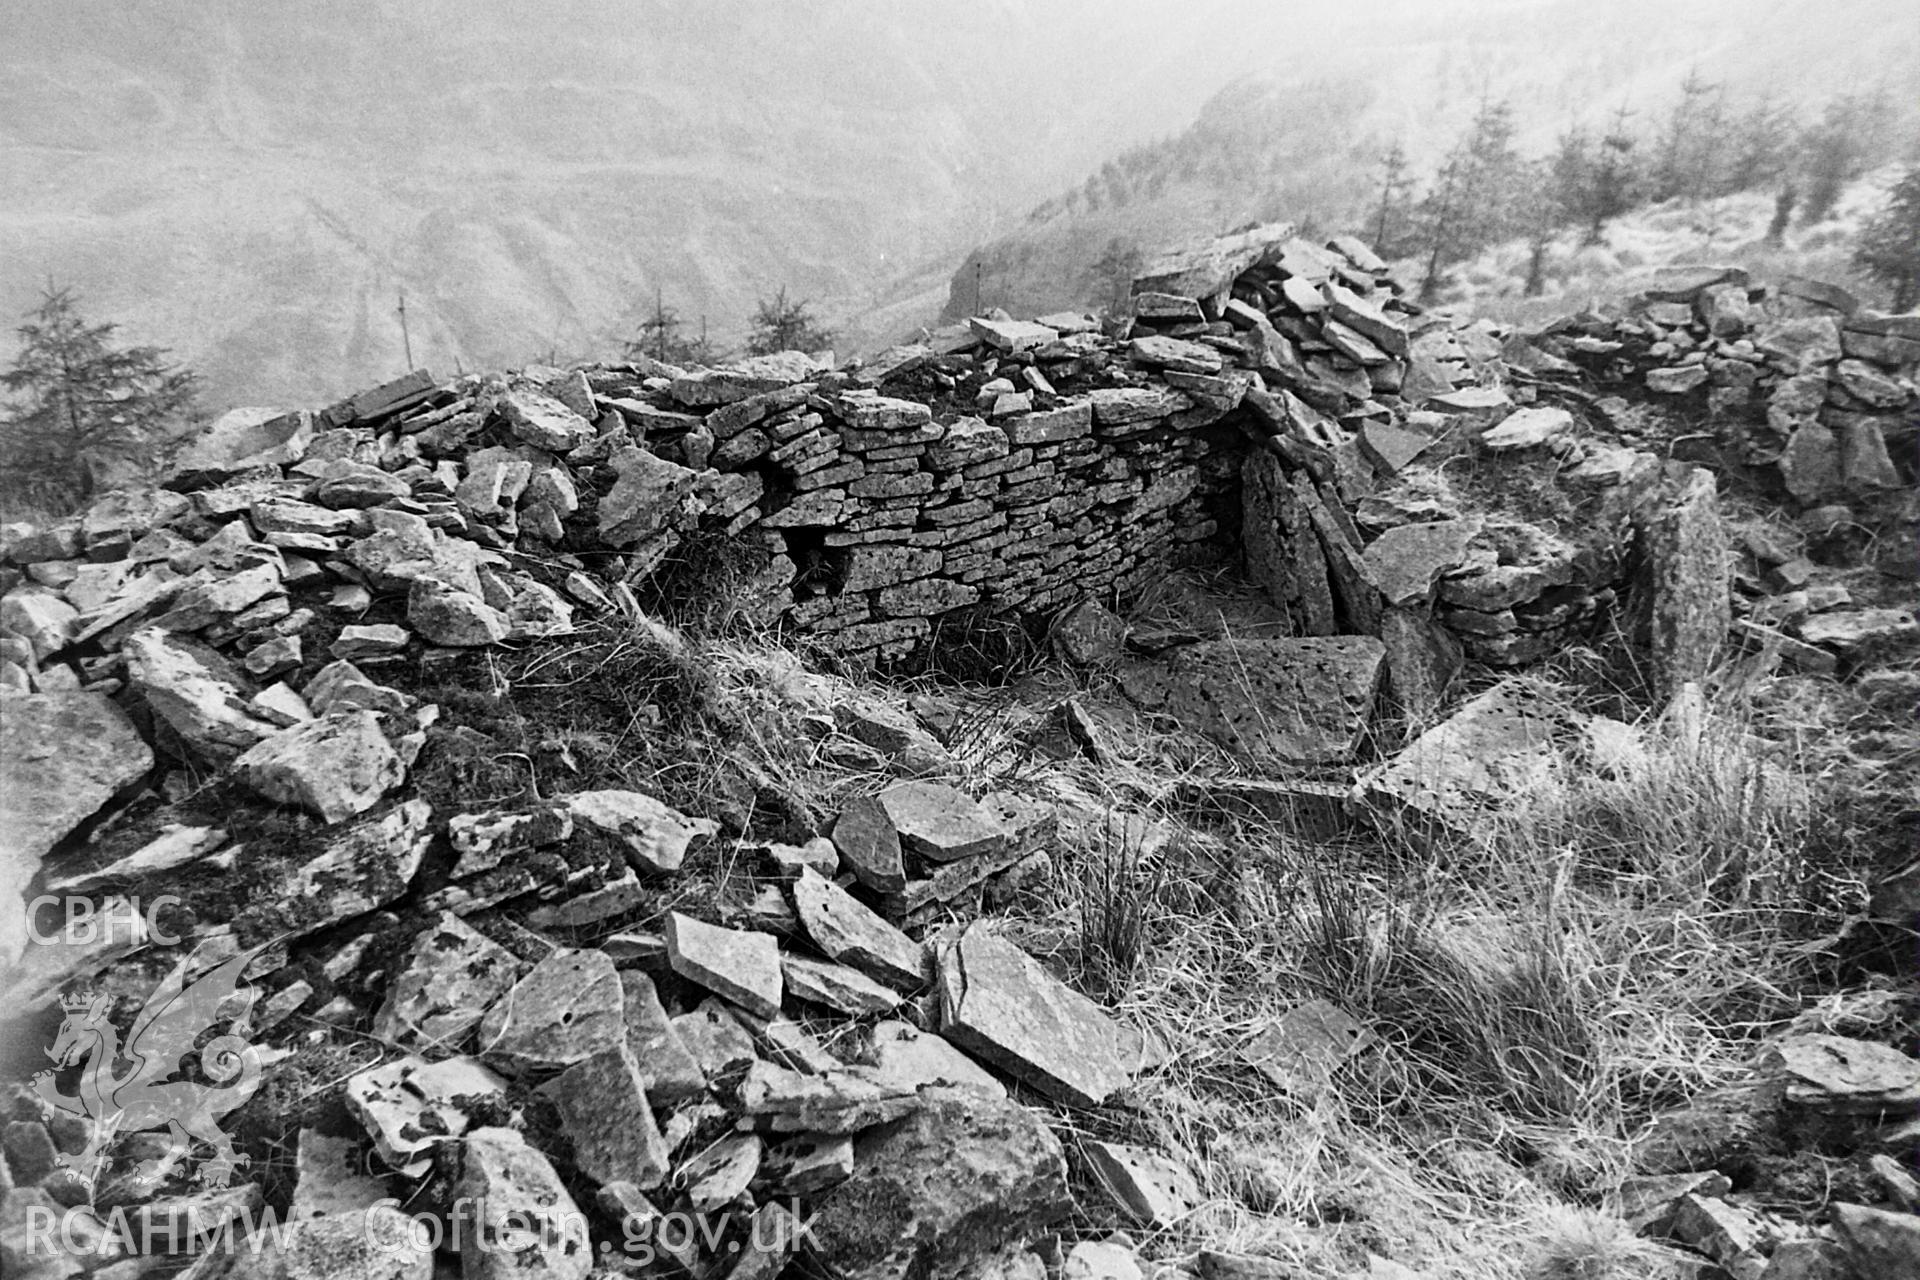 Black and white photo showing Cwar y Offeriad, associated with a report on early Rhondda houses, compiled by Paul R. Davis, c.2016.